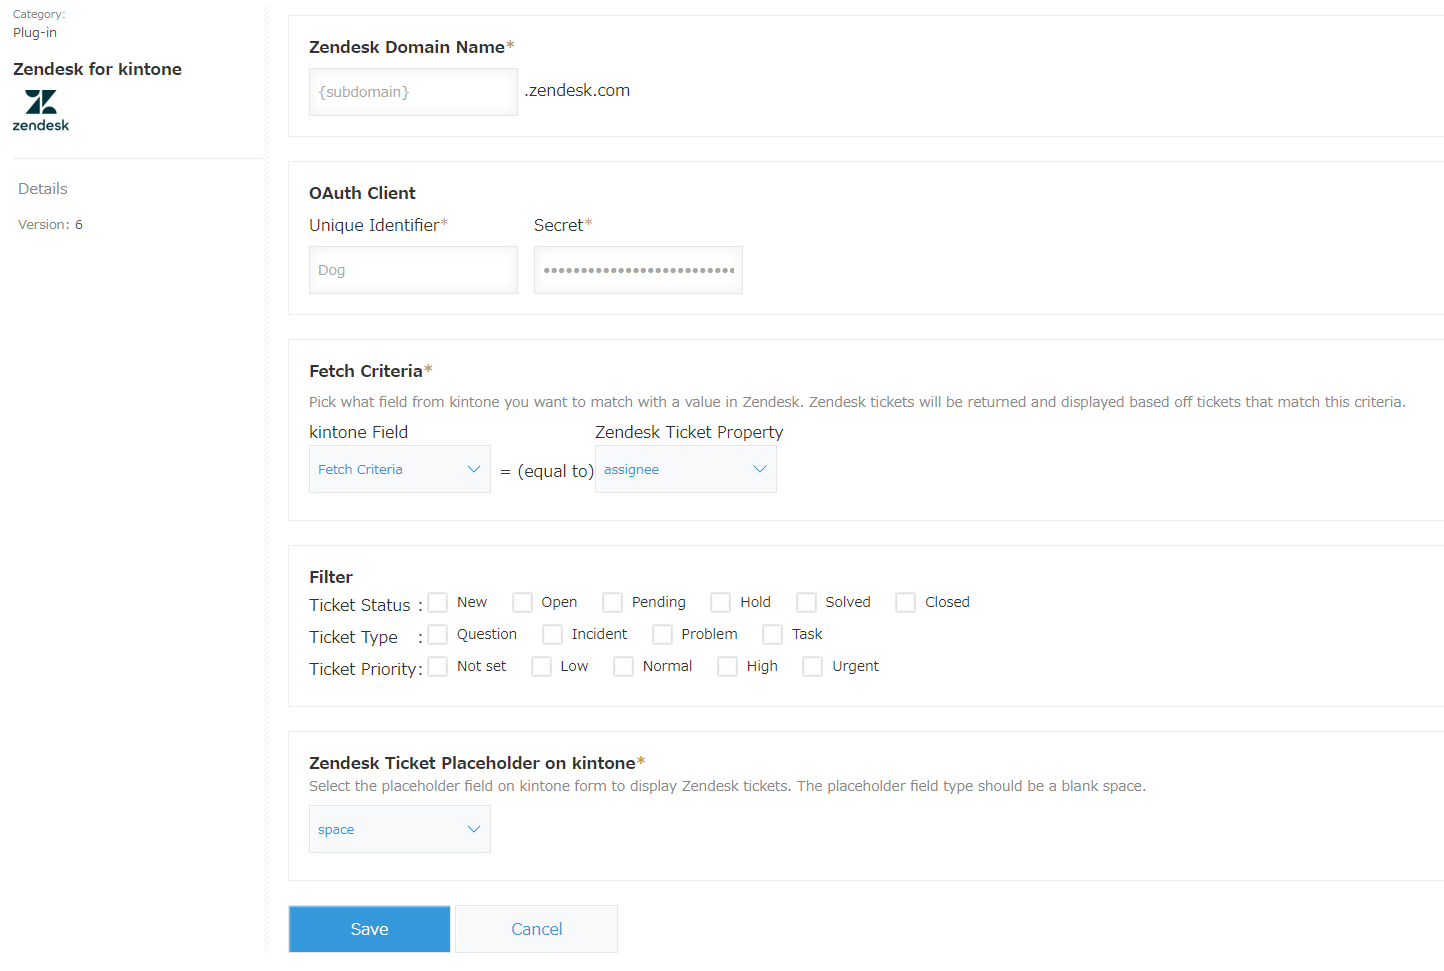 Screenshot: The settings page for the Zendesk plug-in.